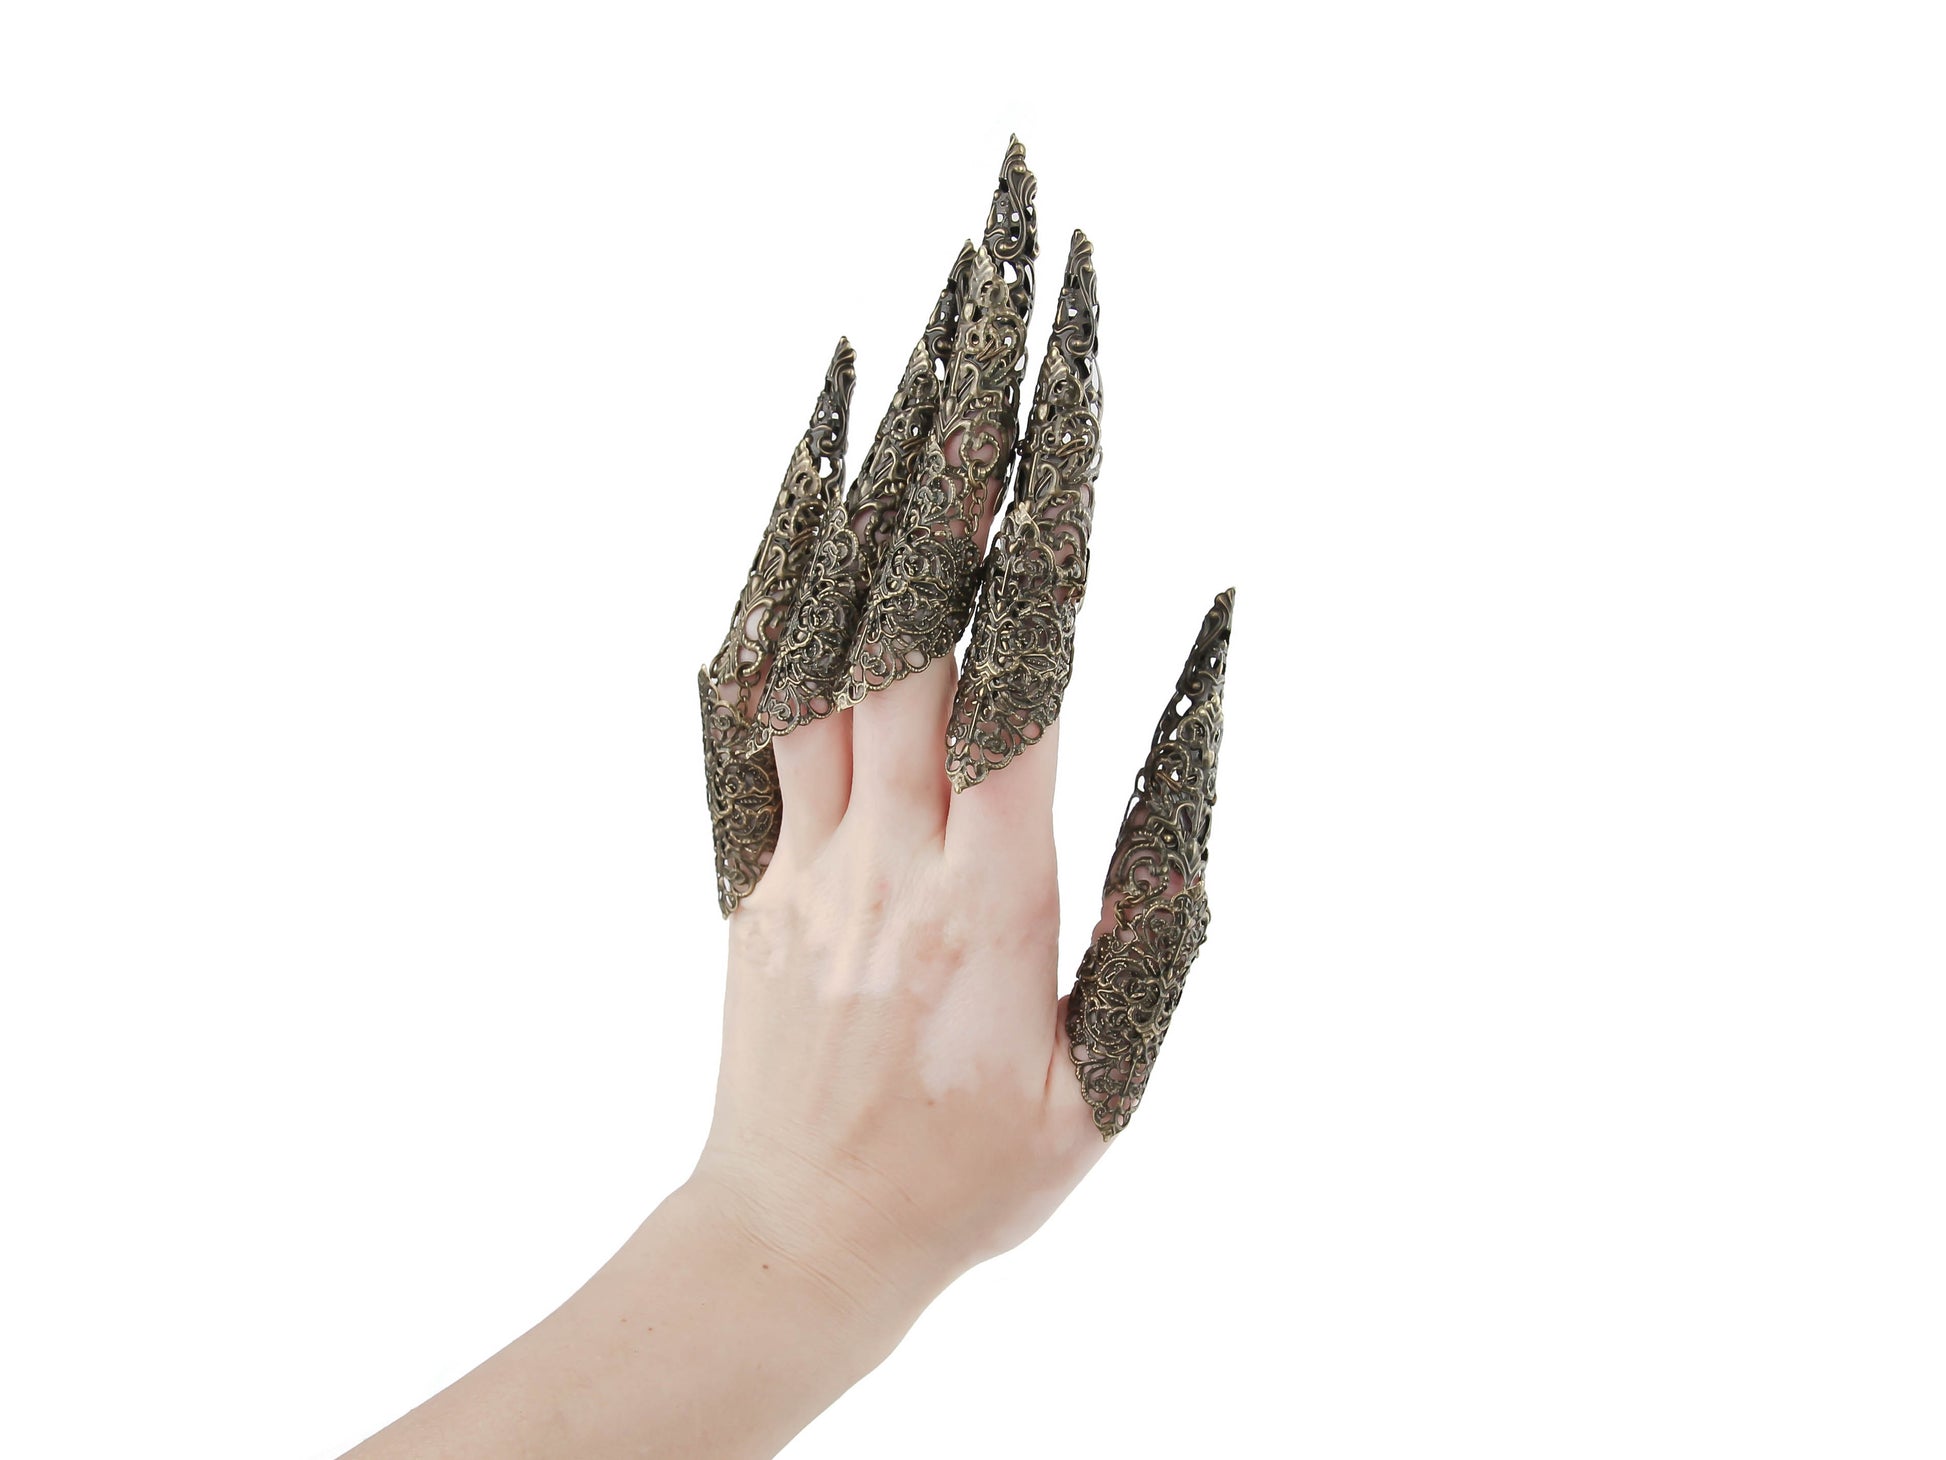 Hand adorned with Myril Jewels' bronze midi rings, each extending into intricate long claws, embodying a neo-gothic flair. Perfect for those who favor Halloween Jewelry or bold, gothic-chic everyday wear, these rings are true festival jewels, reflecting a dark, avant-garde style